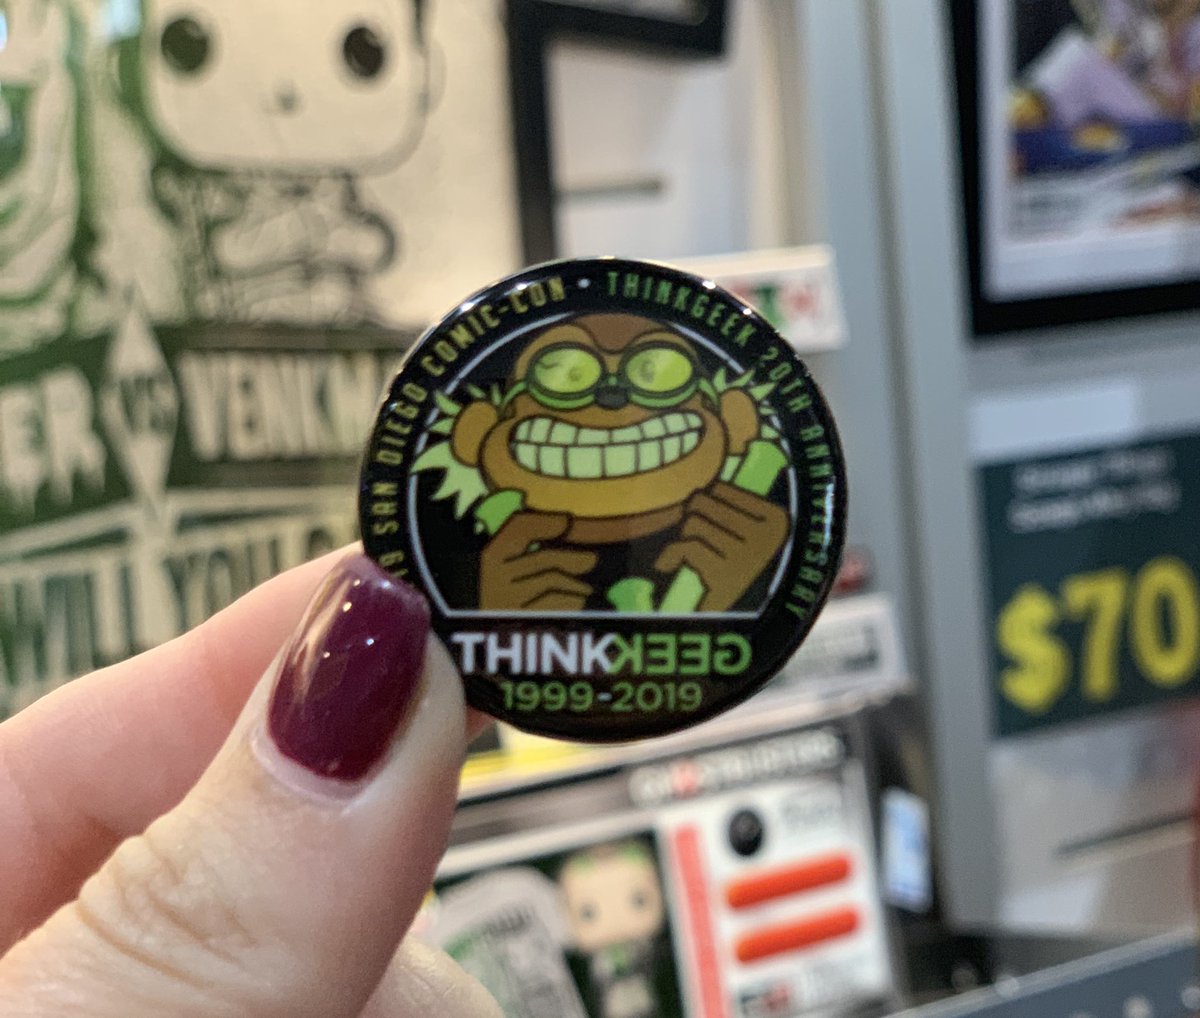 Want a mad scientist Timmy button? Come by booth 3349 and give us your most evil laugh. Mwah ha ha #SDCC19 #SDCC2019